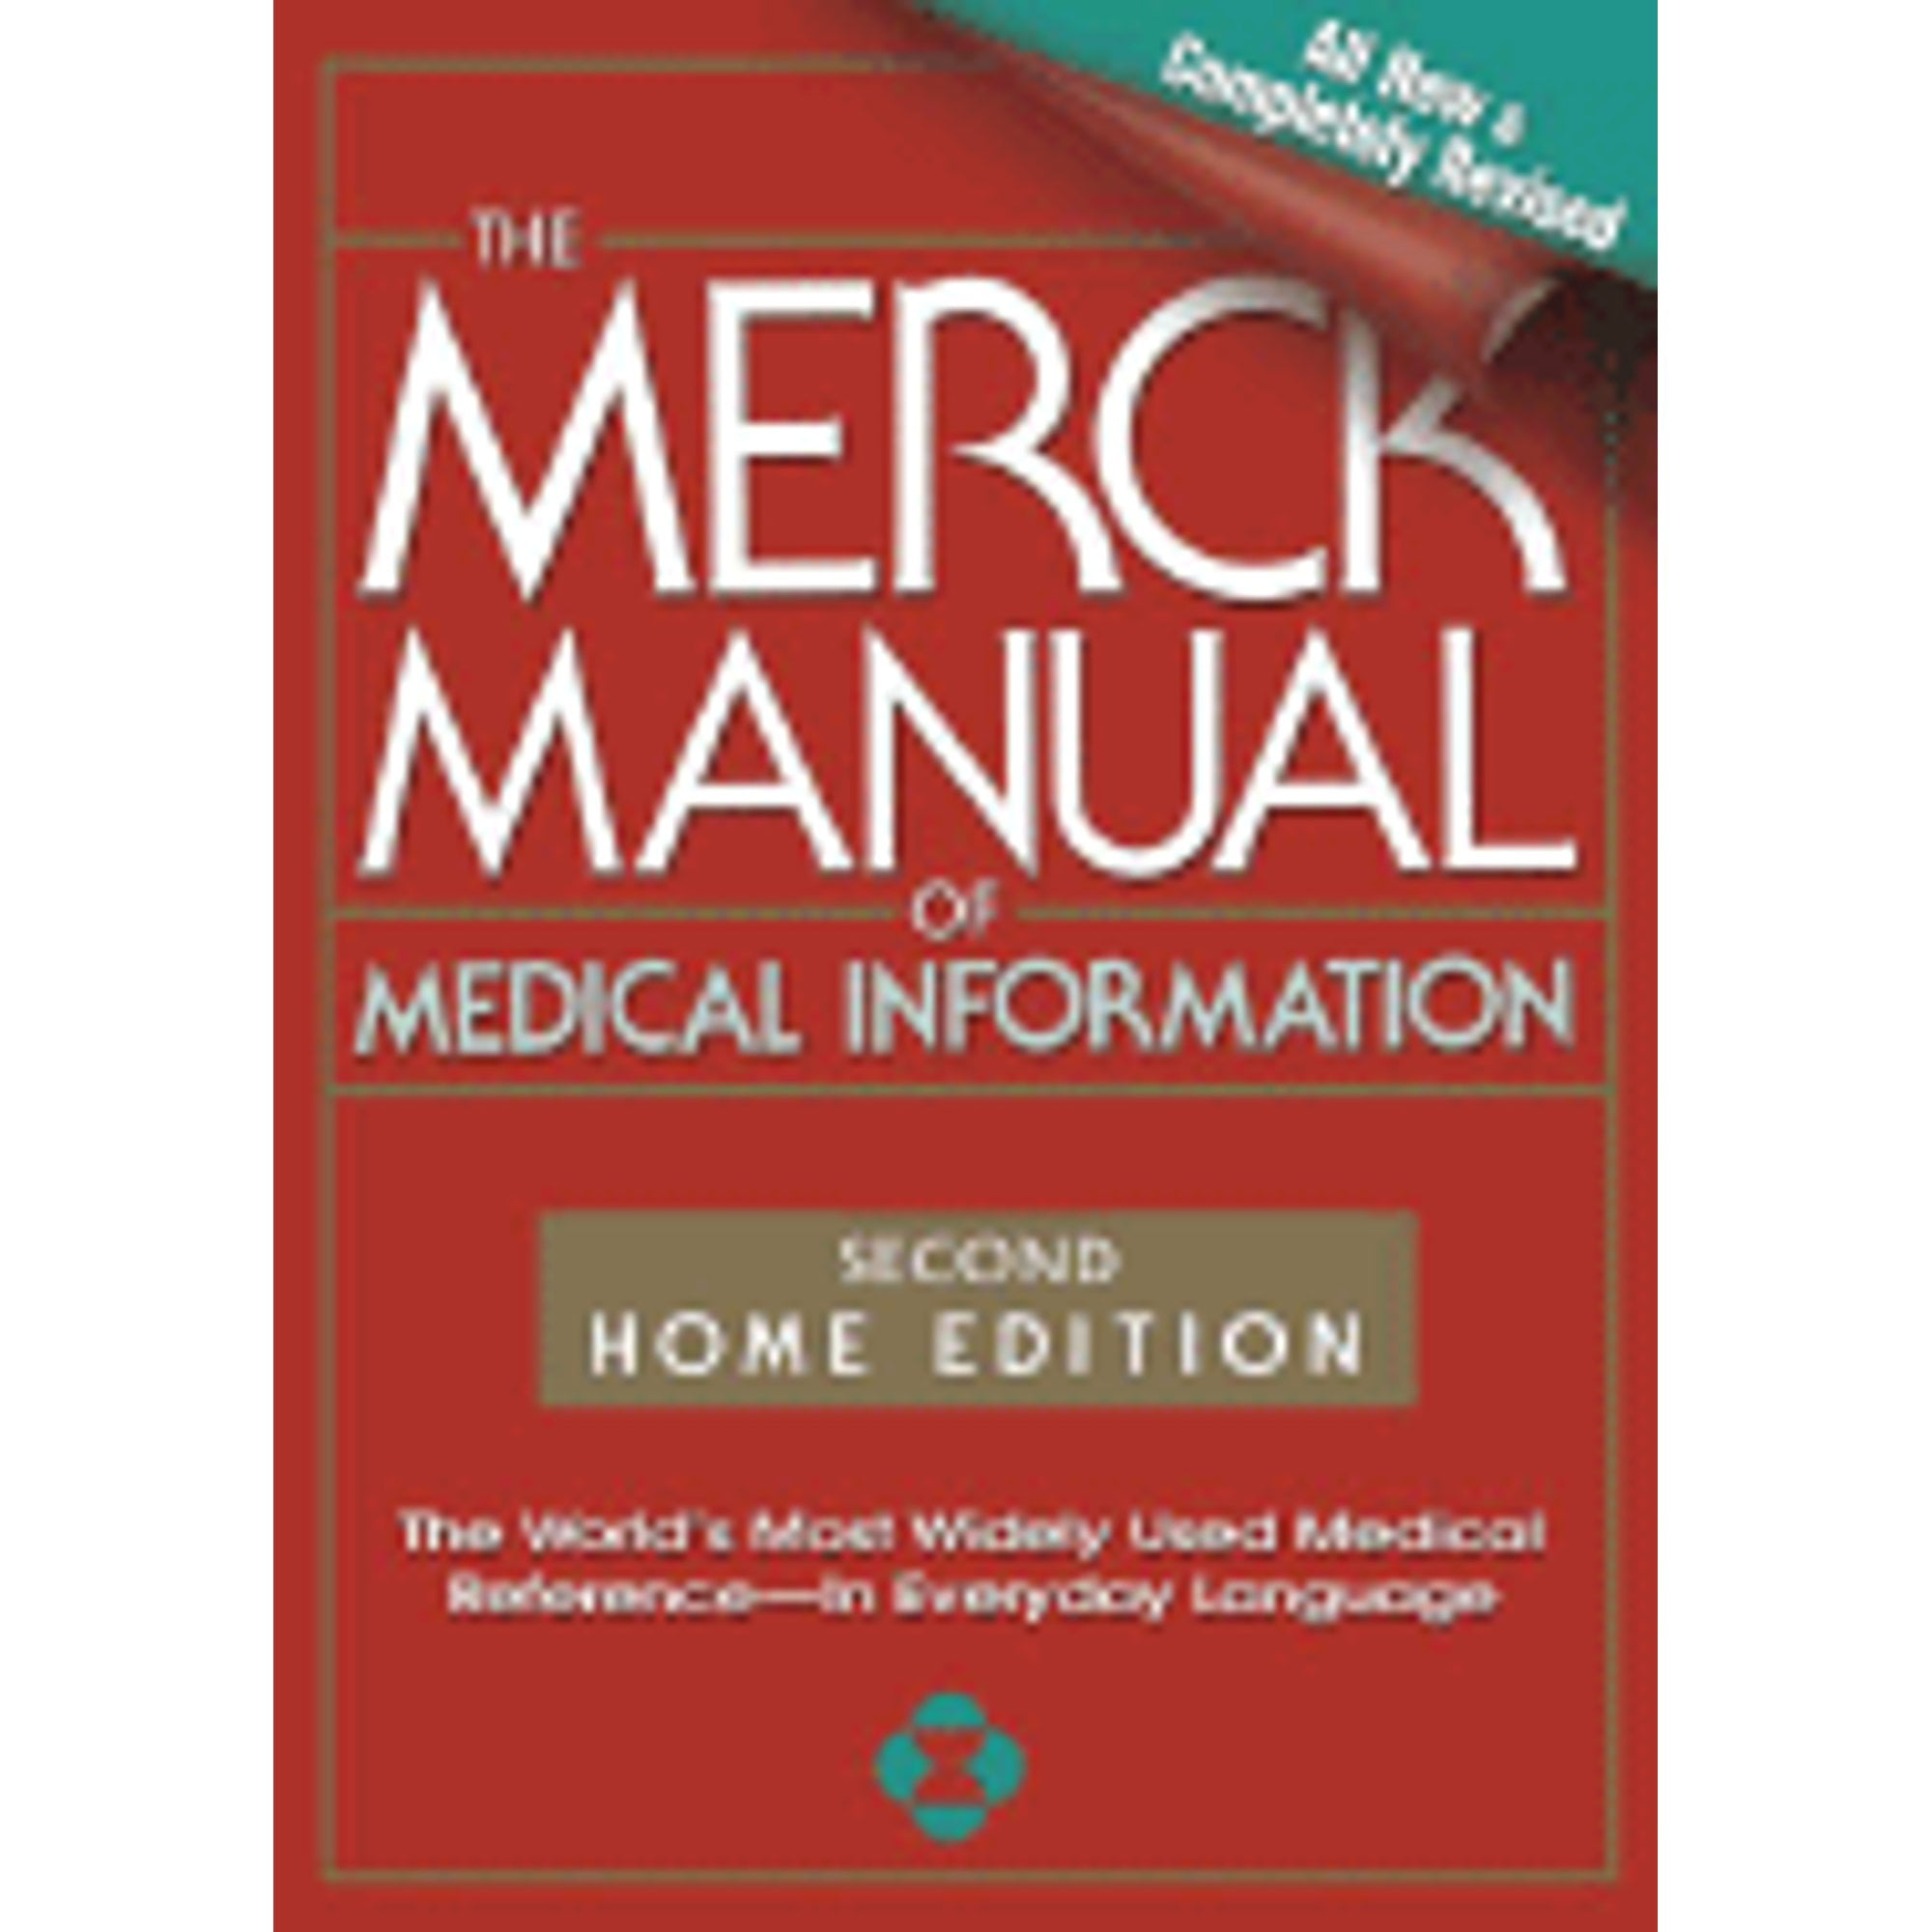 Pre-Owned The Merck Manual of Medical Information, Second Edition: Worlds Most Widely Reference - Now In Everyday Language Hardcover Mark H. Beers